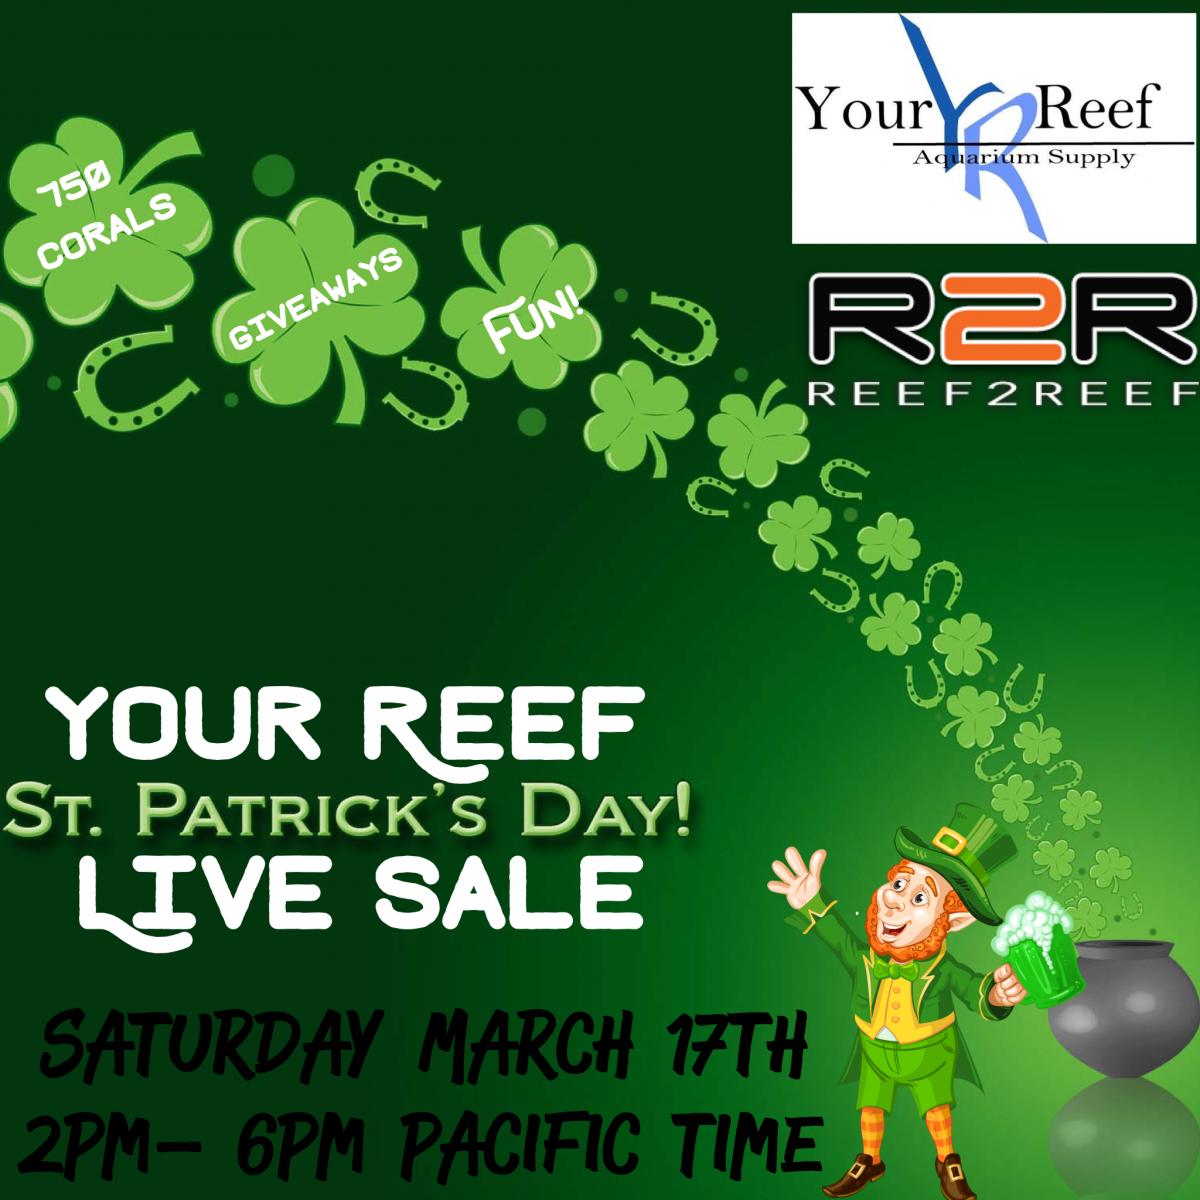 YR St. Patrick's Day Live Sale- March 17th, 2pm-6pm (pacific time) |  REEF2REEF Saltwater and Reef Aquarium Forum